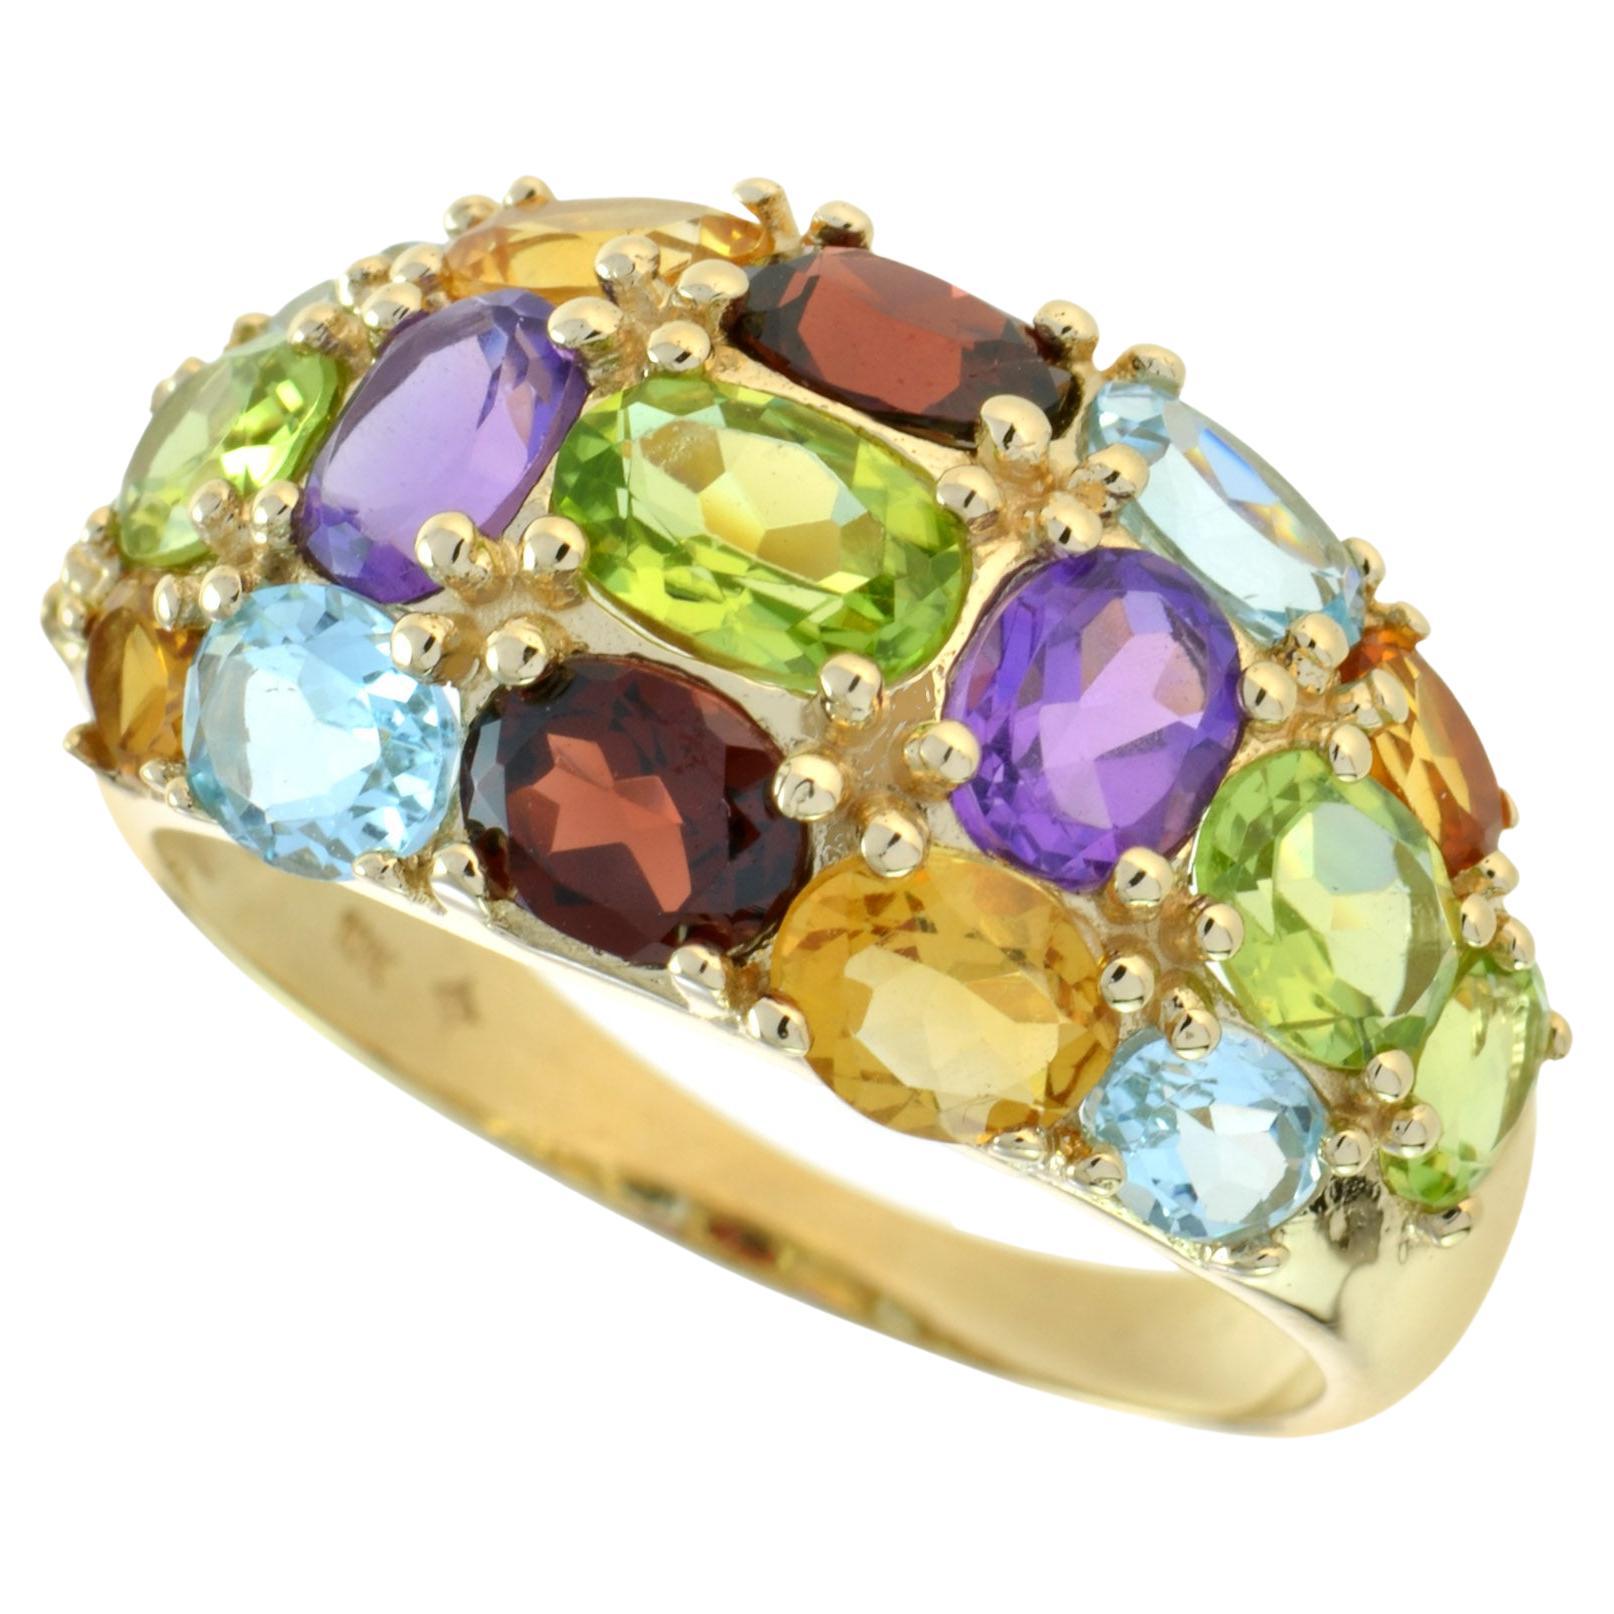 For Sale:  Vintage Style Multi Gemstone Cocktail Ring in 14K Yellow Gold